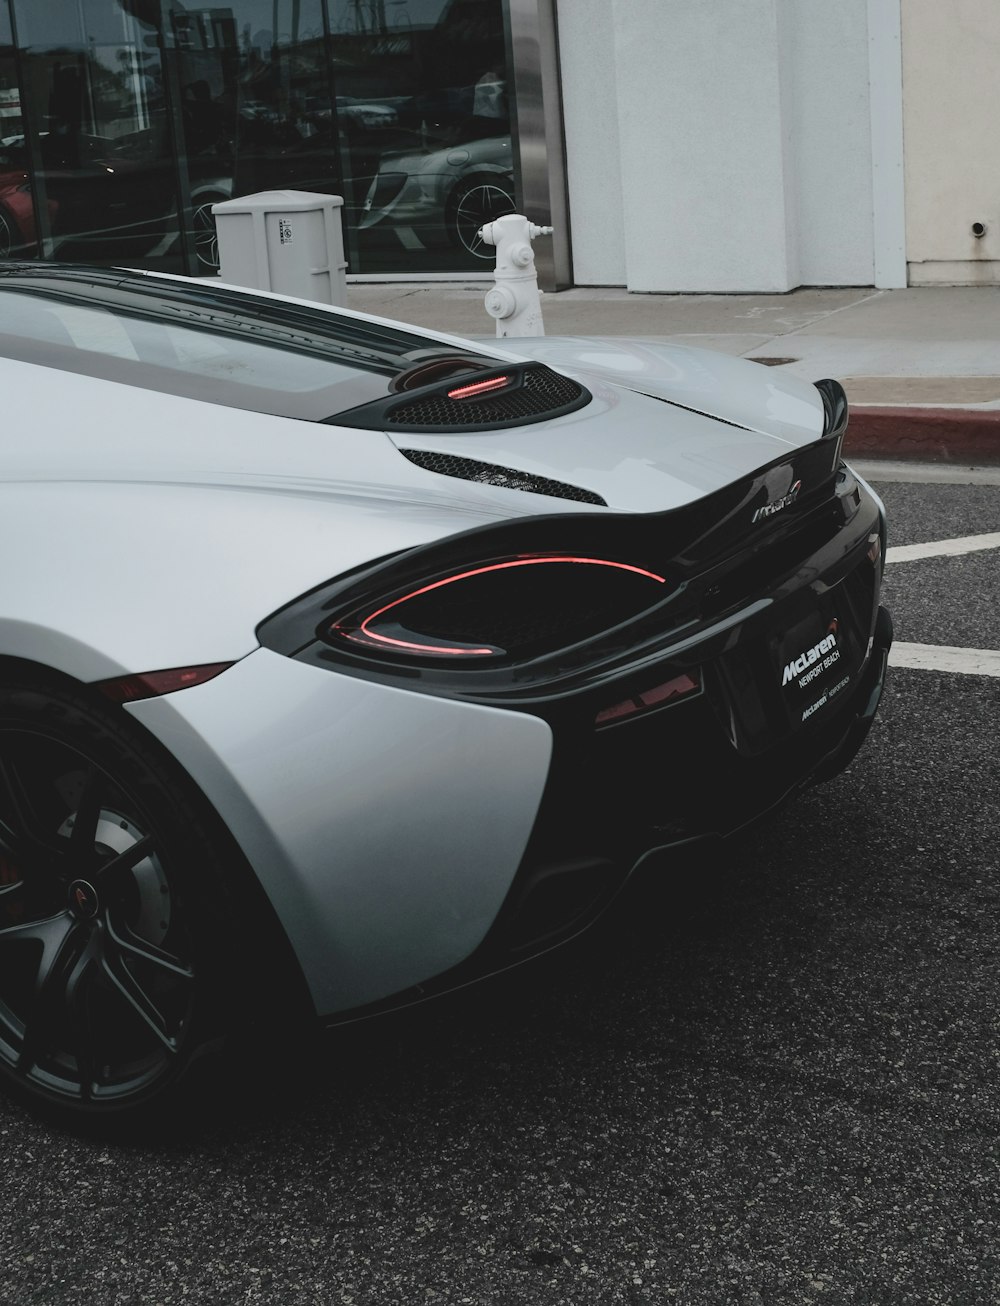 The taillights on a white sports car.